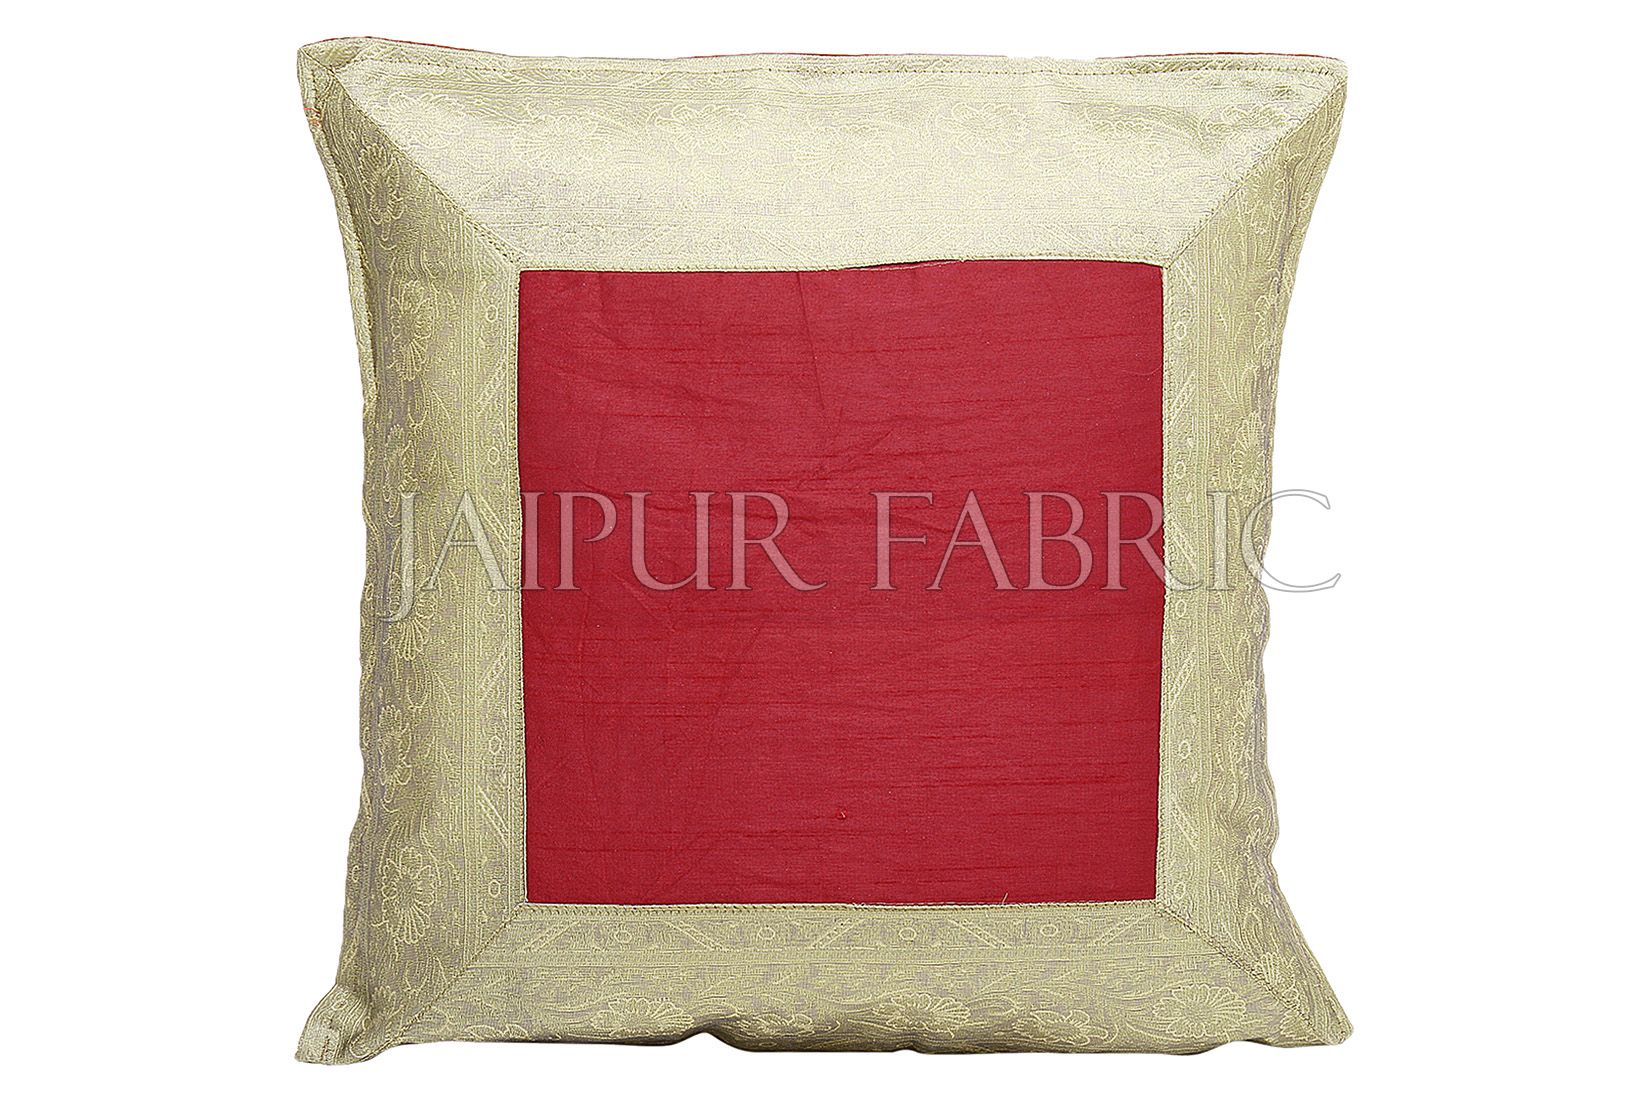 Red Base with Golden Gota Work Border Cotton Satin Silk Cushion Cover